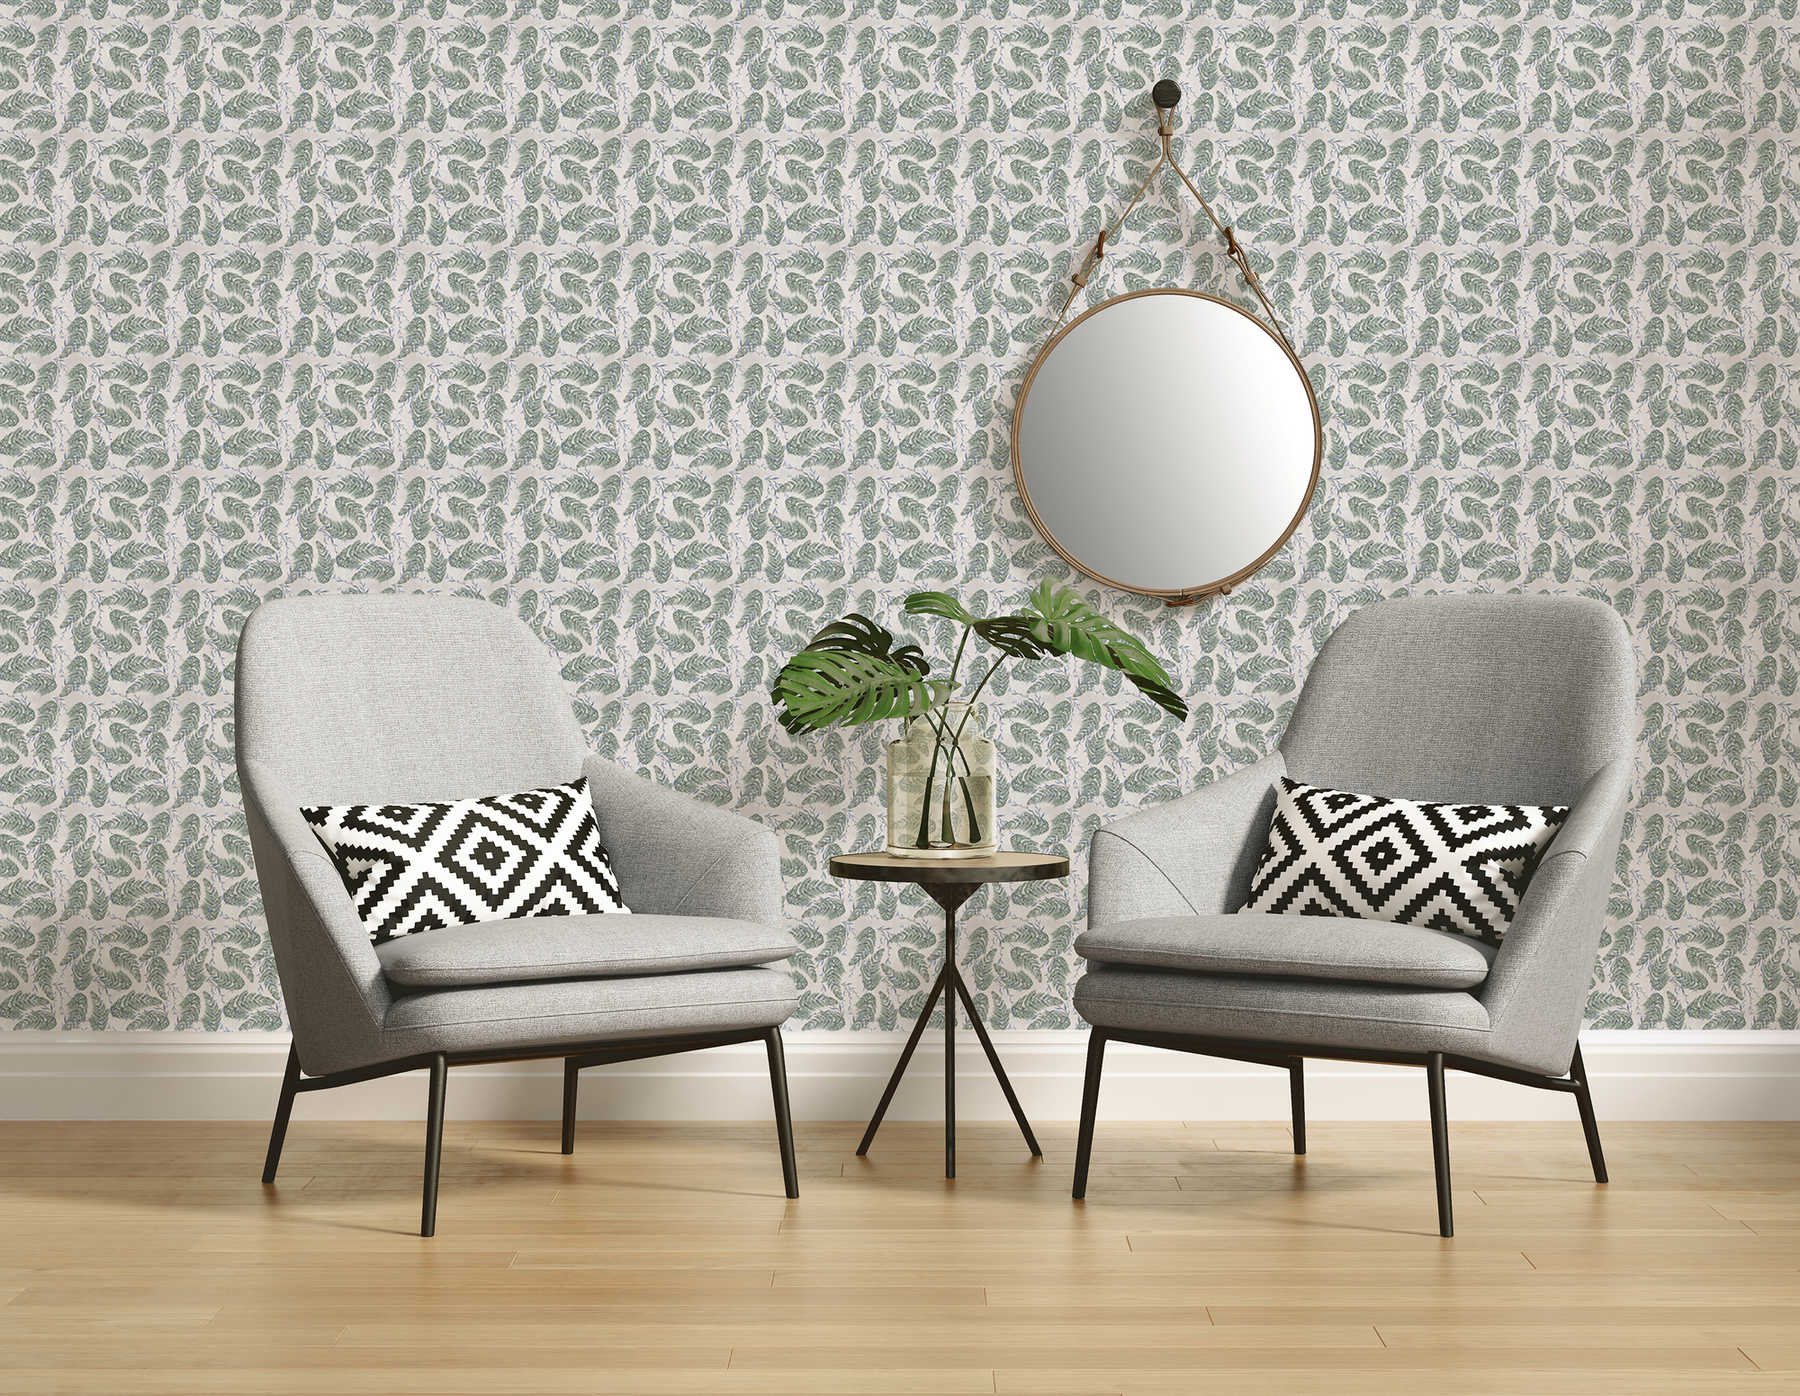             Design wall mural with floral pattern in grey and green on premium smooth nonwoven
        